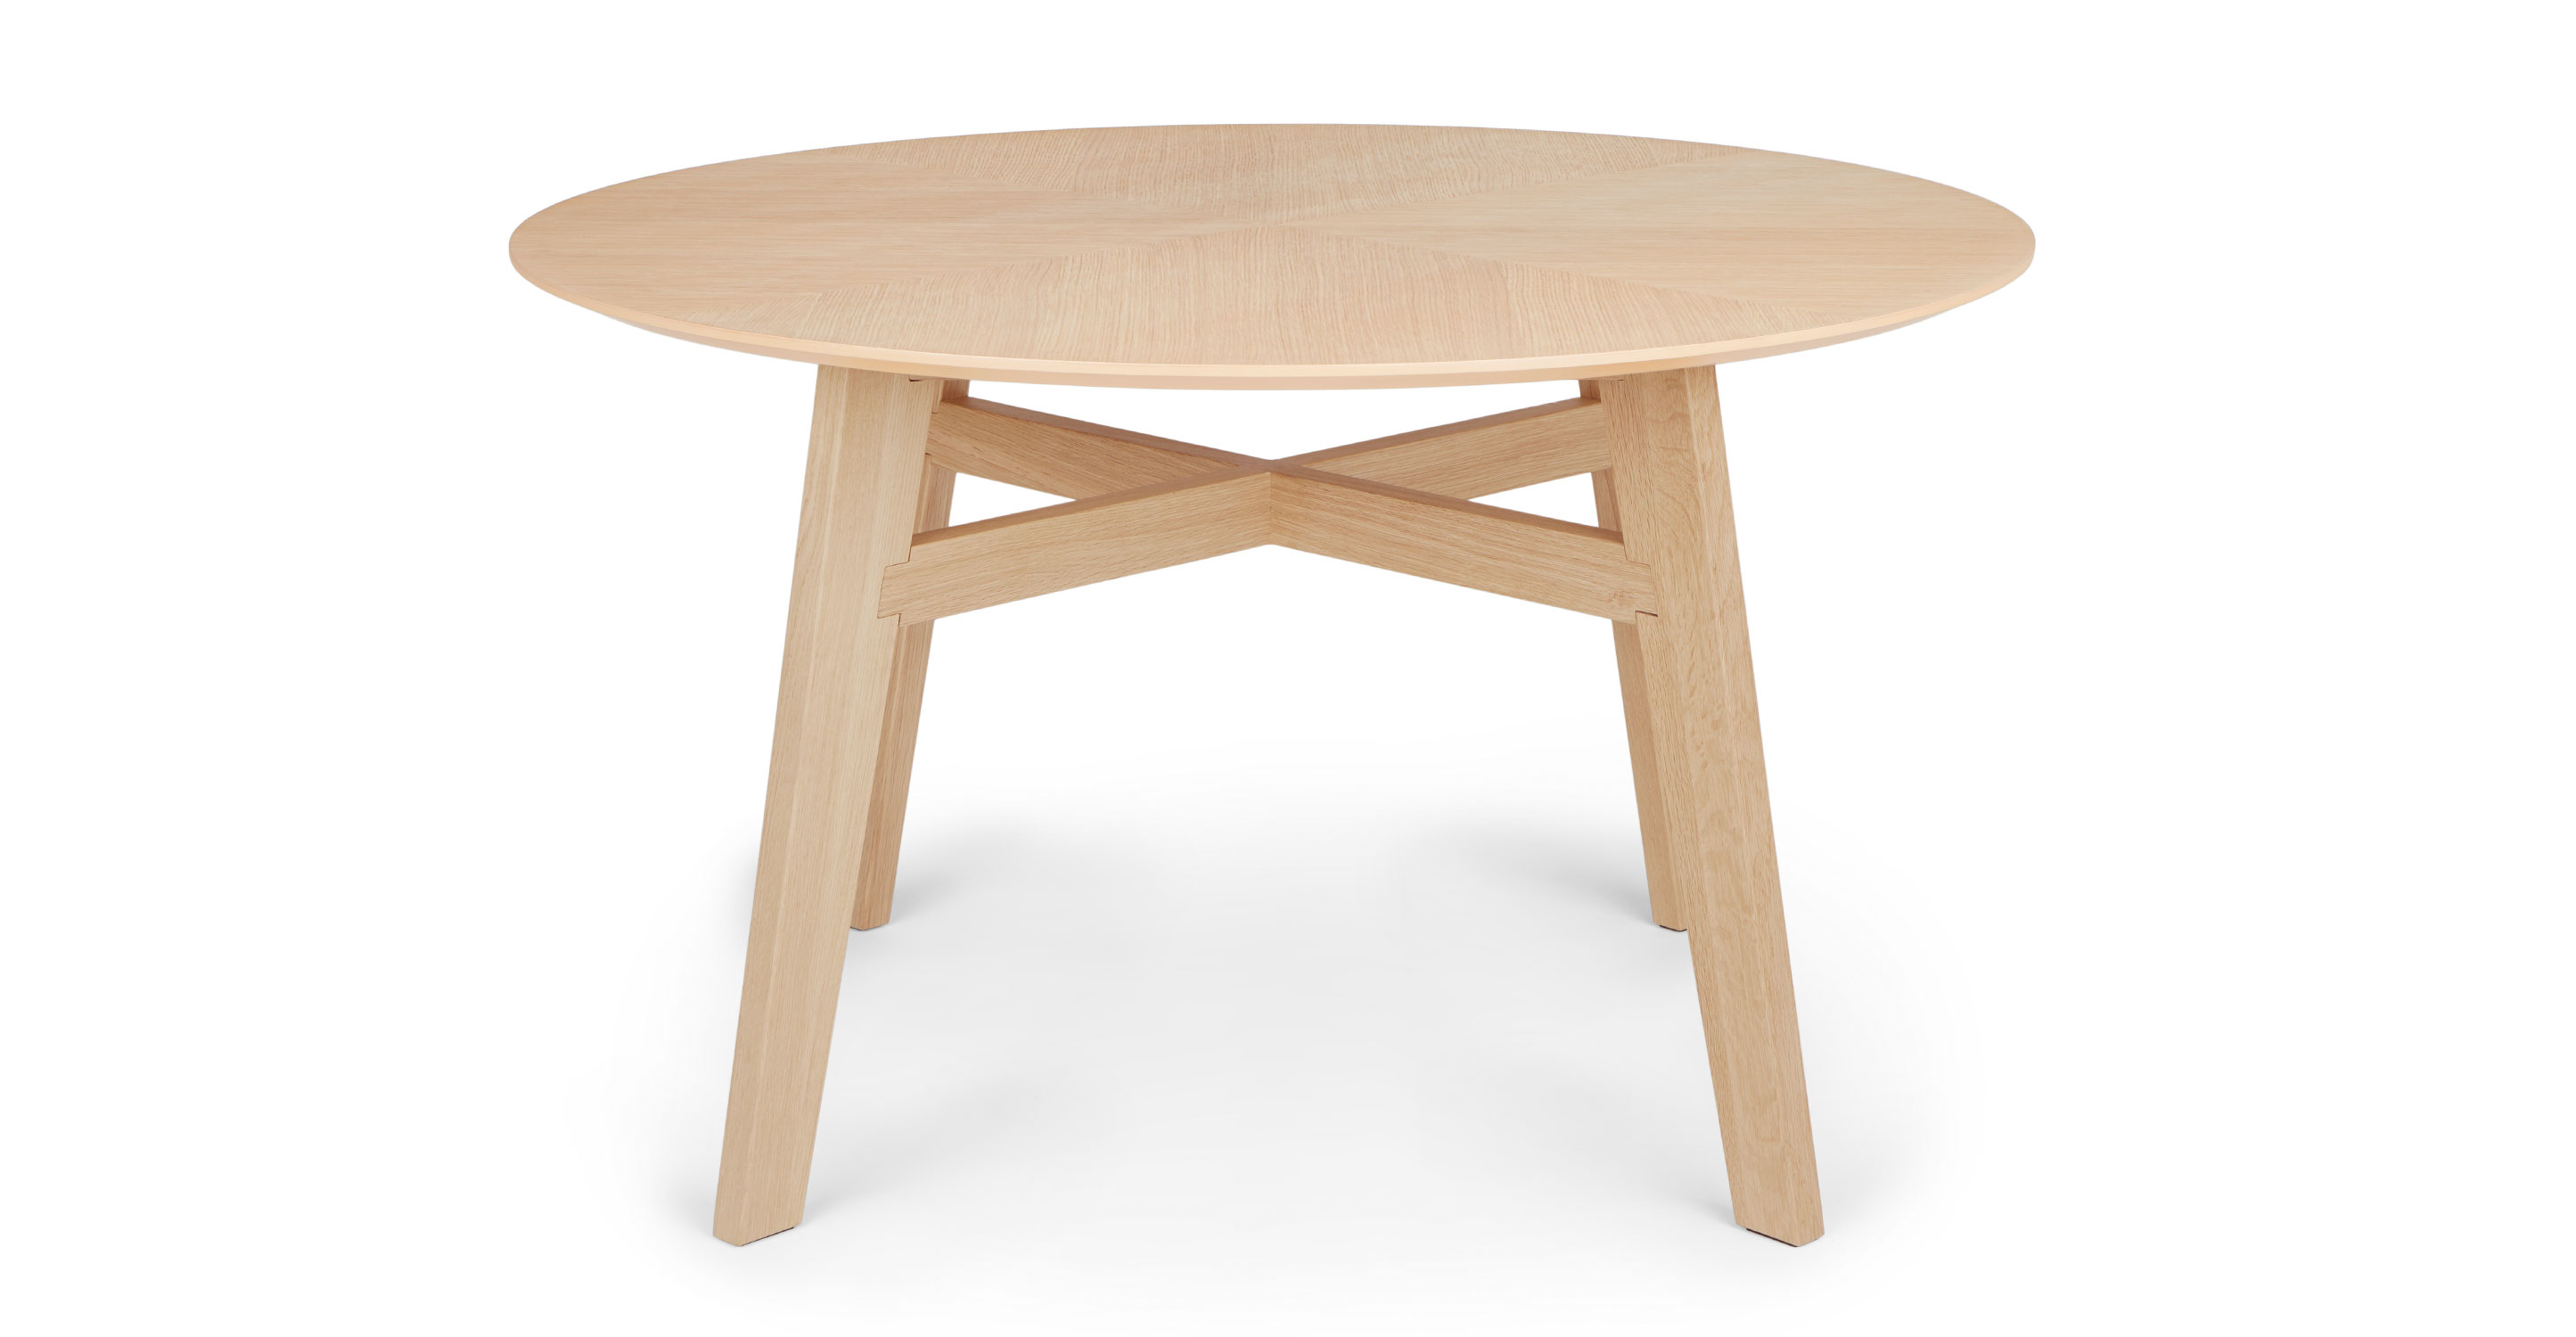 Round Light Oak Dining Table For 4, 52 Round Dining Table Setup